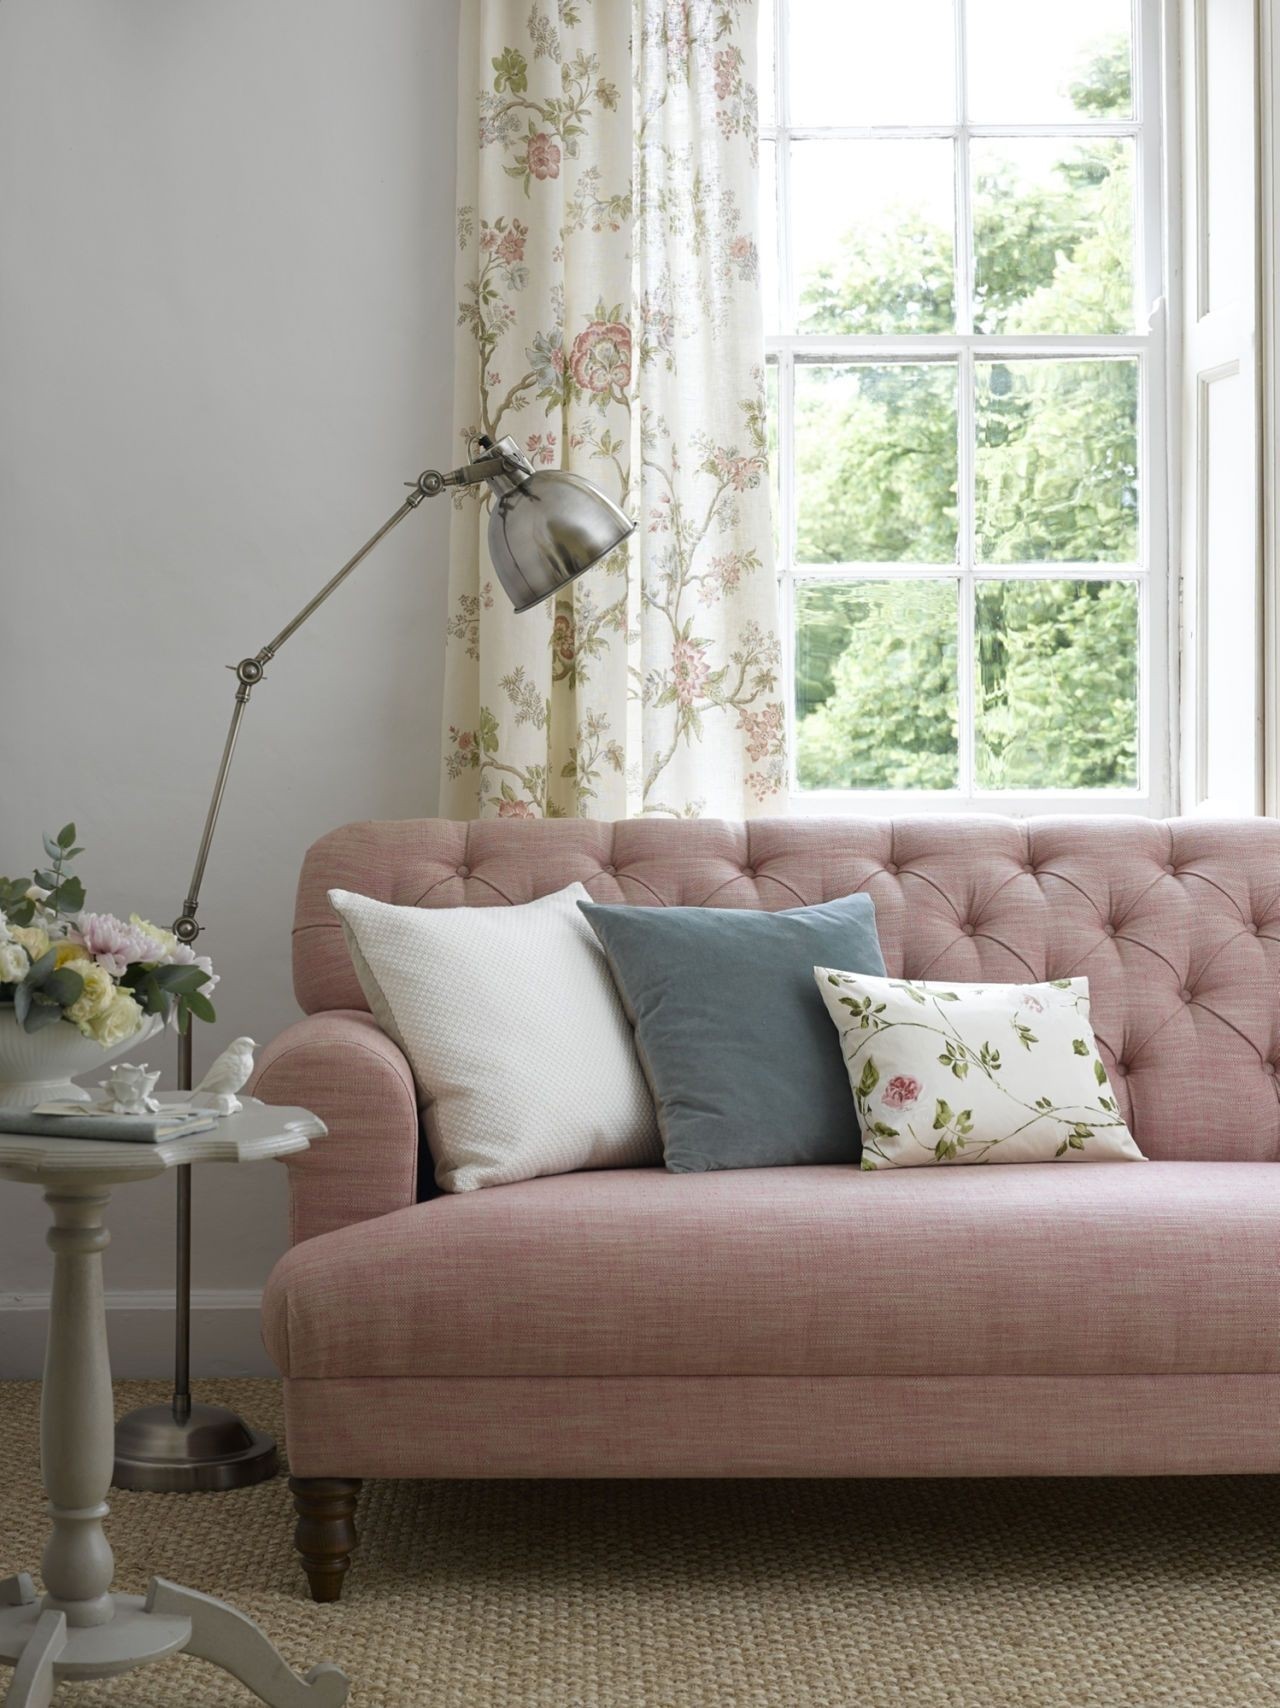 8 styling tricks to achieve the country cottage look in